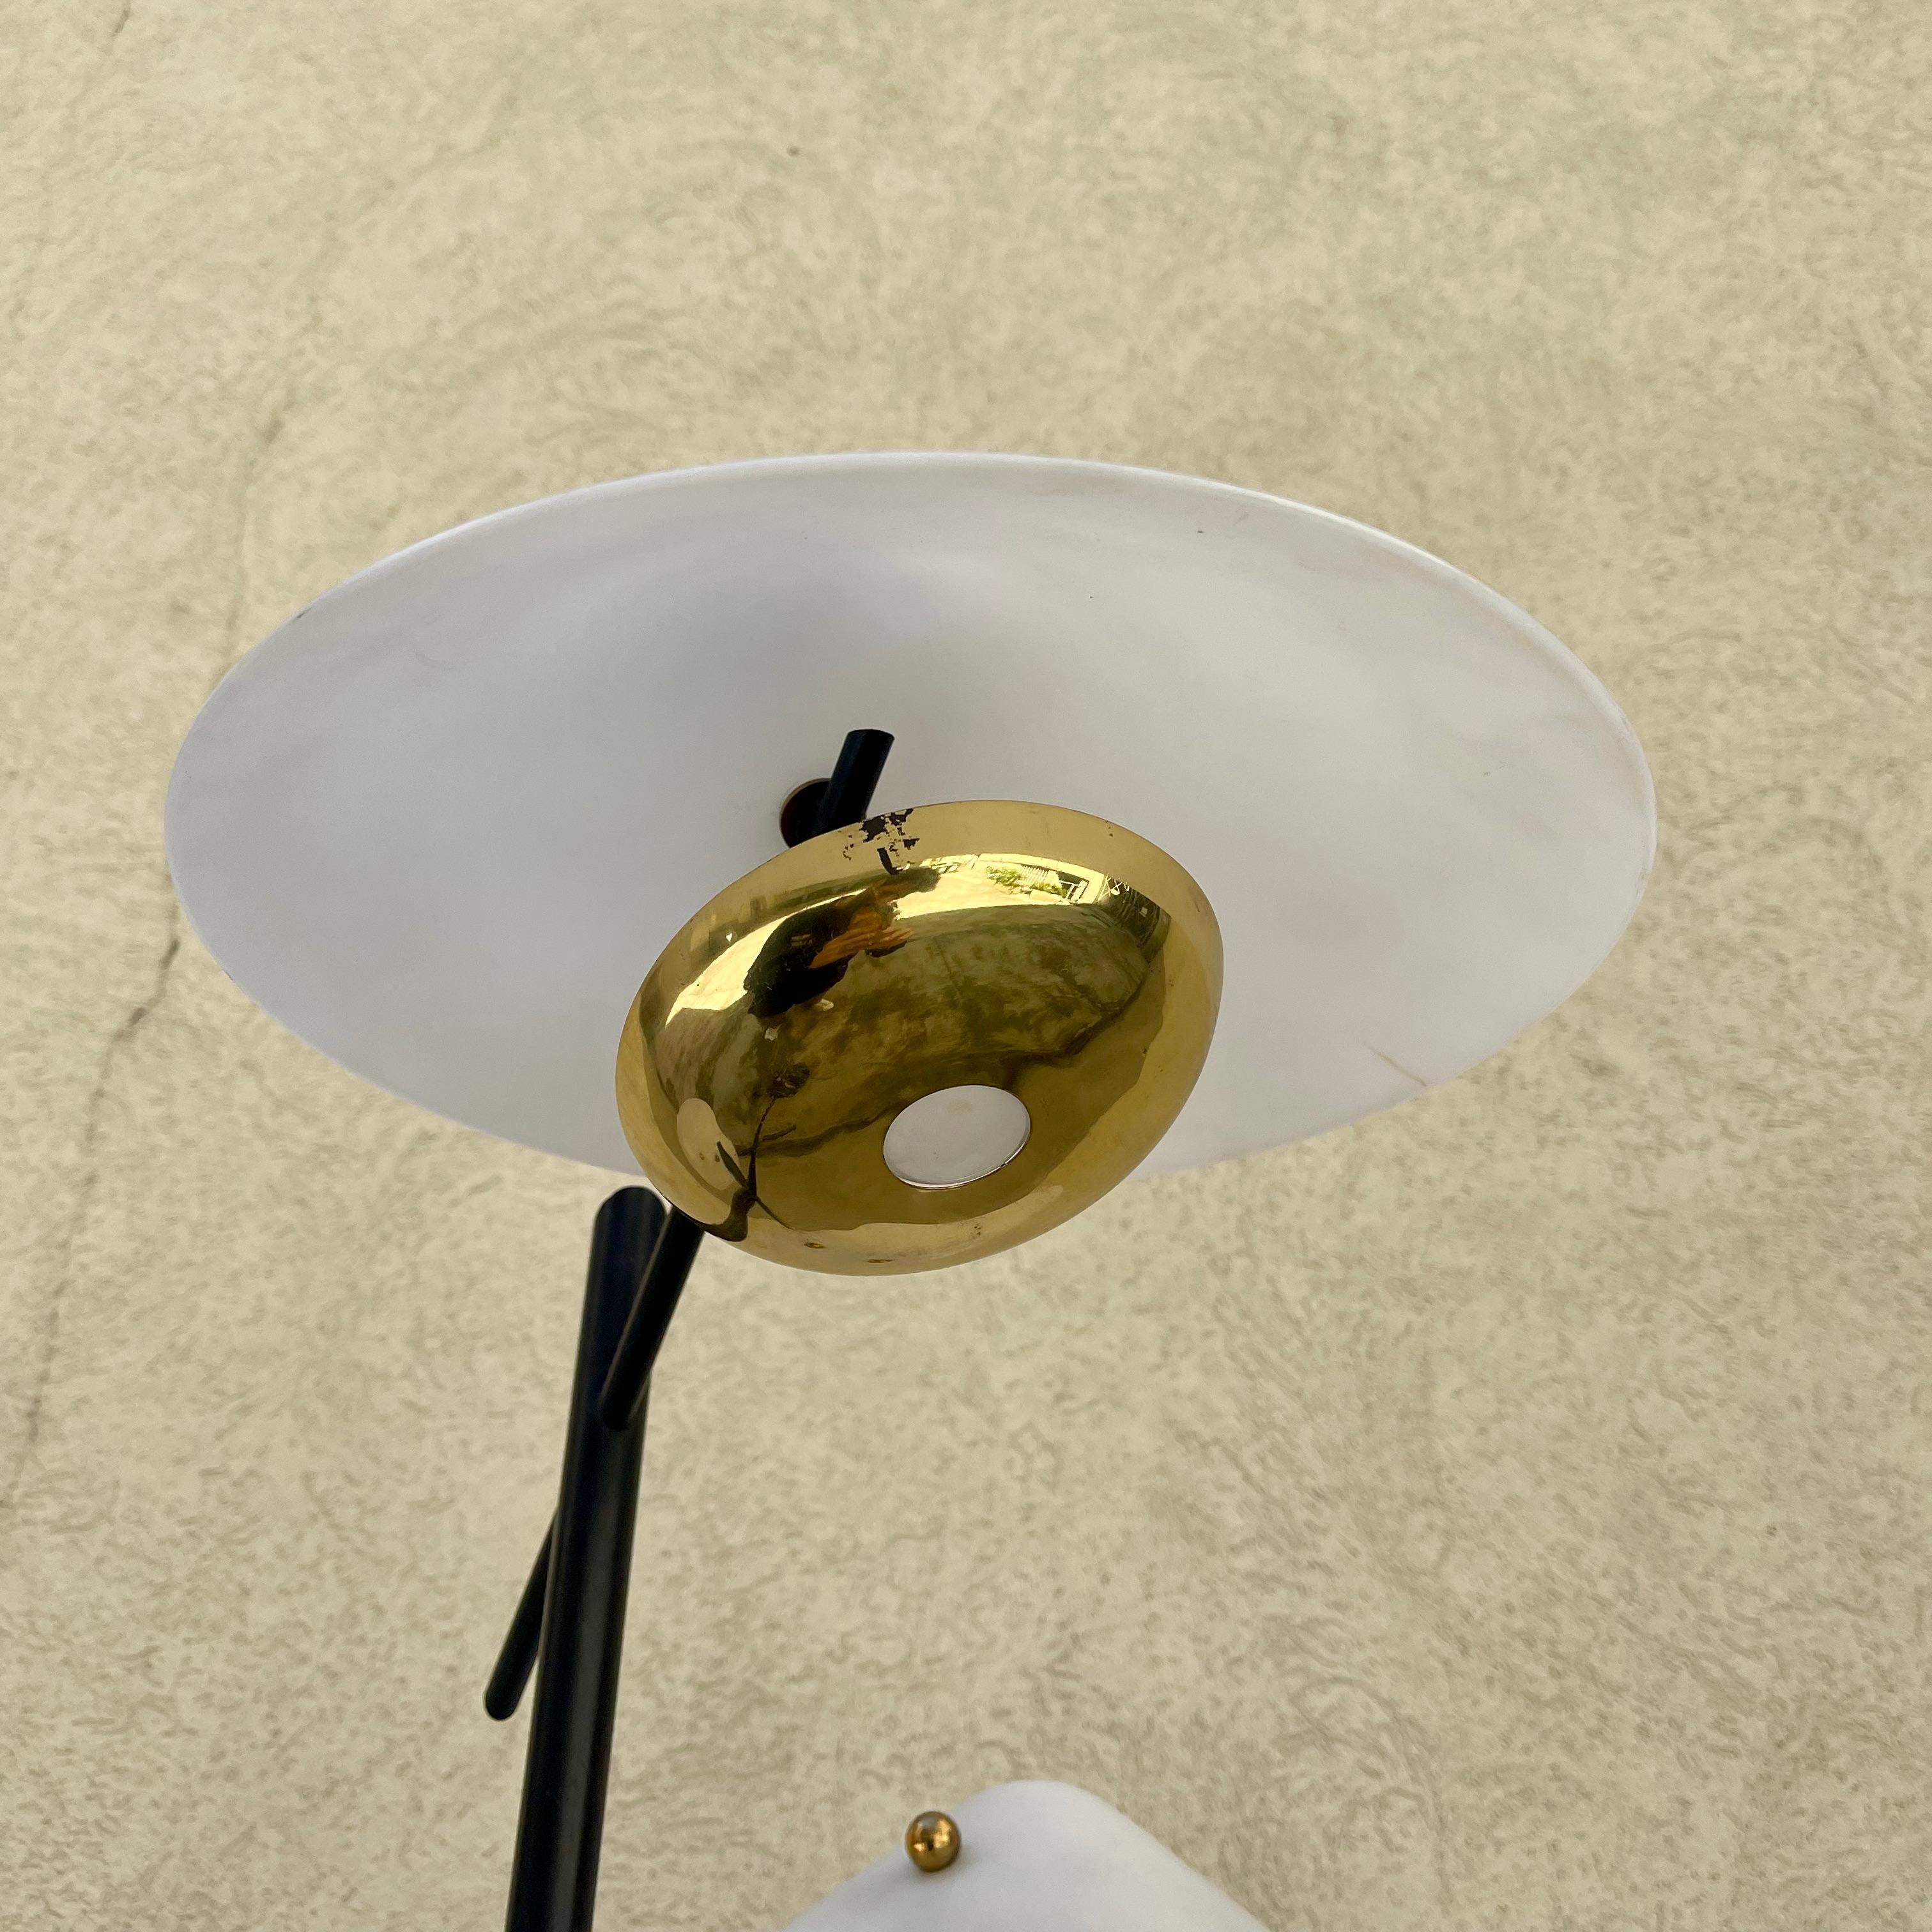 20th Century Italian Floor Lamp in the style of Oluce, 1950s For Sale